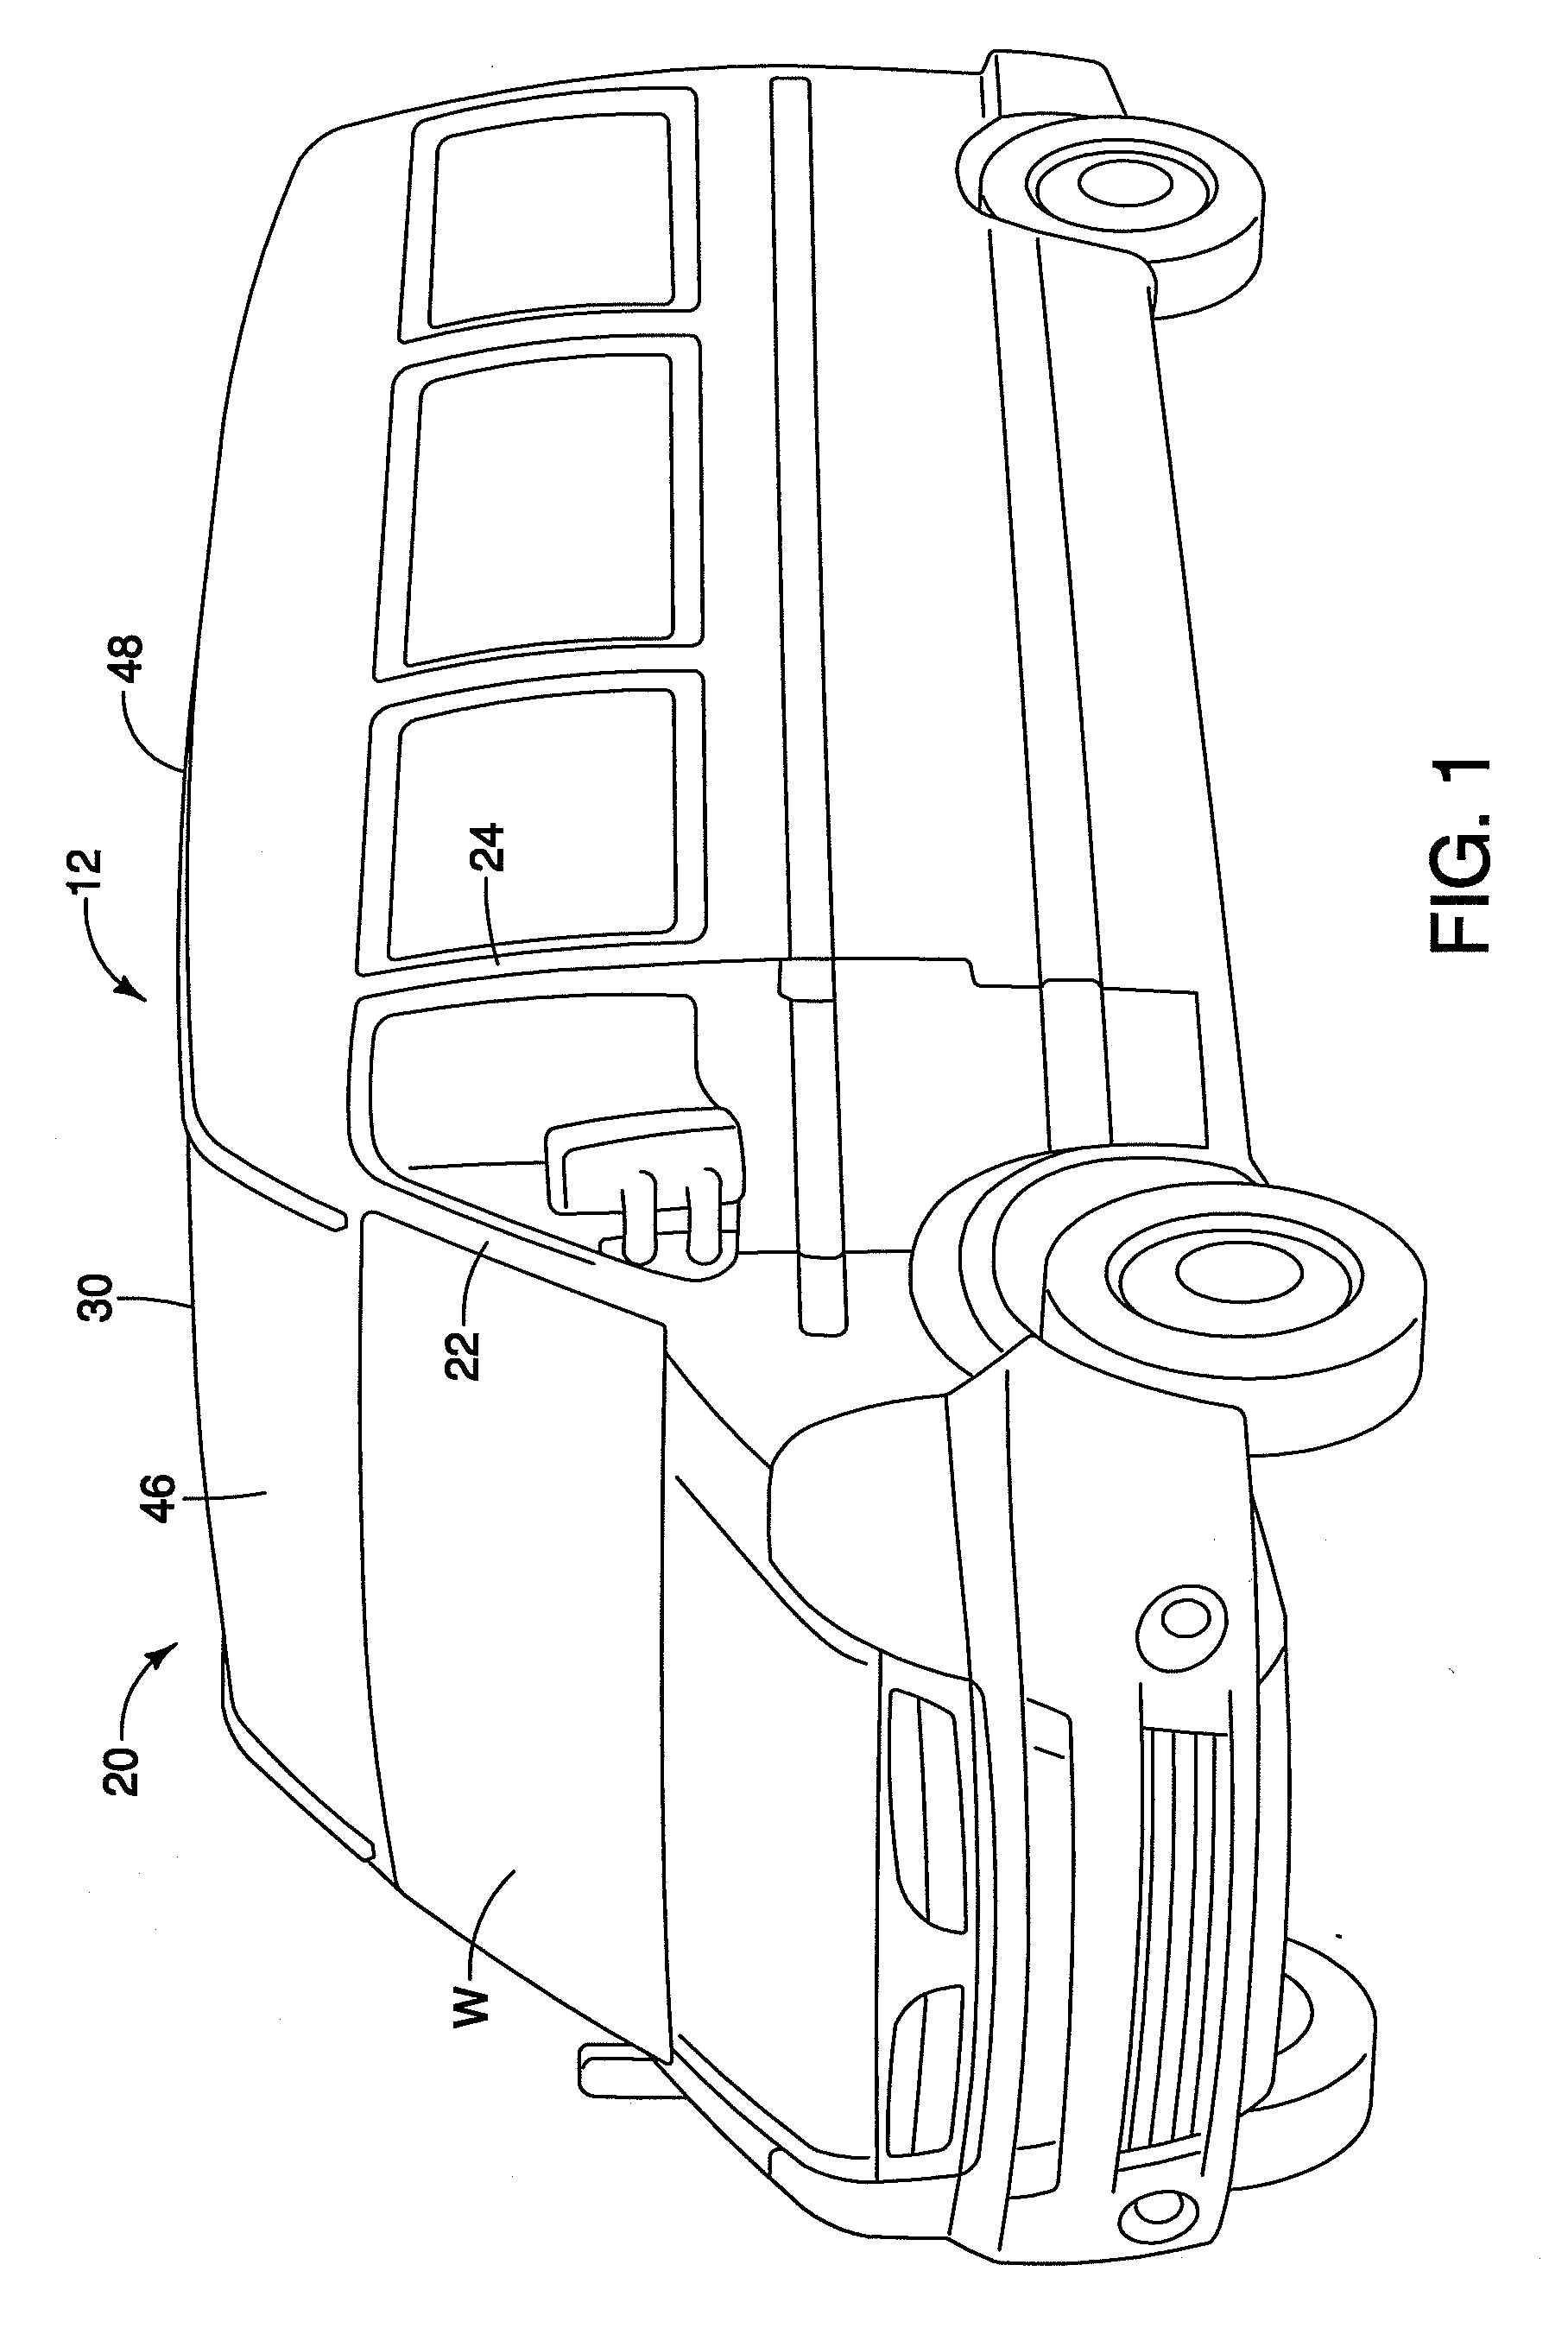 Vehicle roof bow assembly